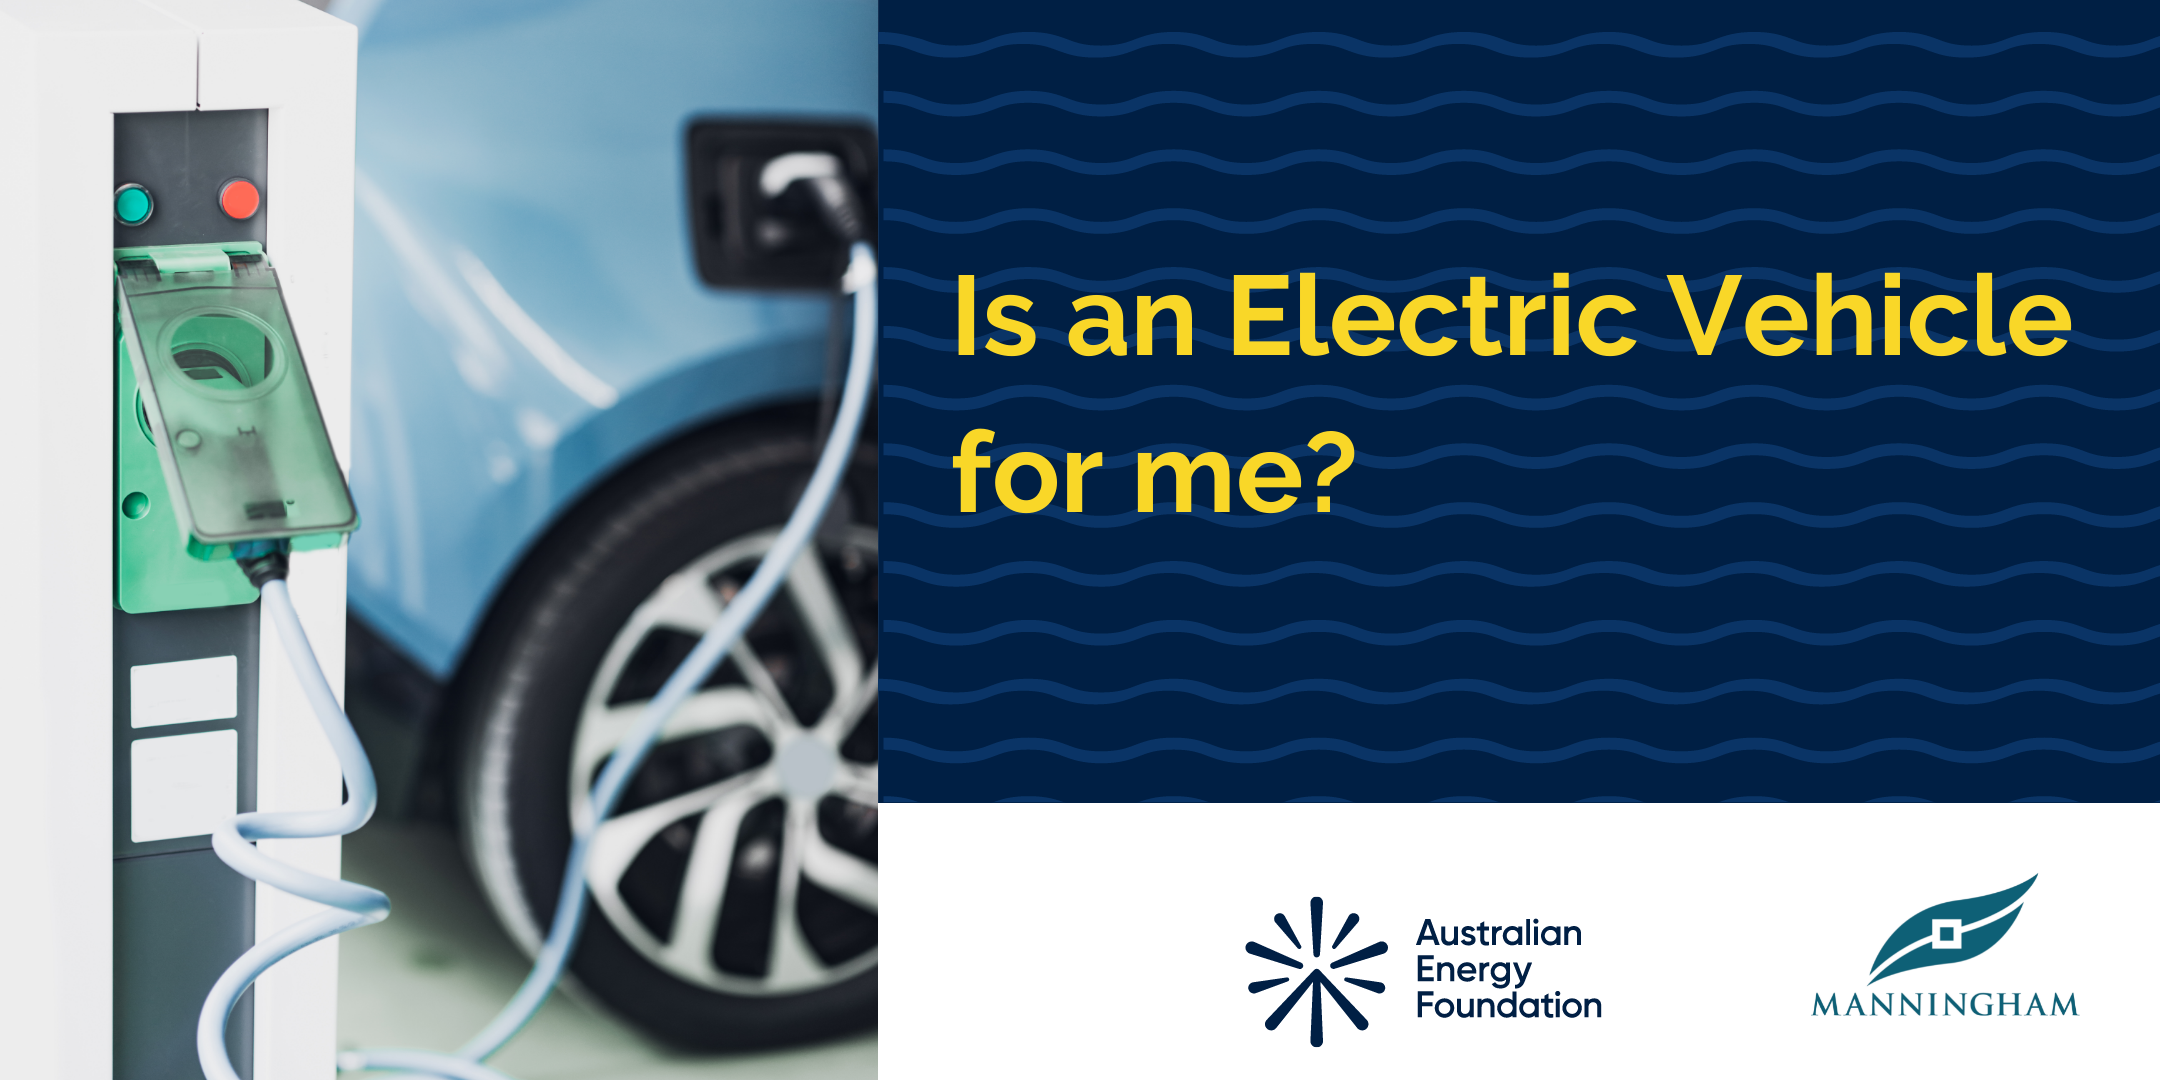 Image of a blue car plugged into an electric charging station and the words is an electric vehicle for me?